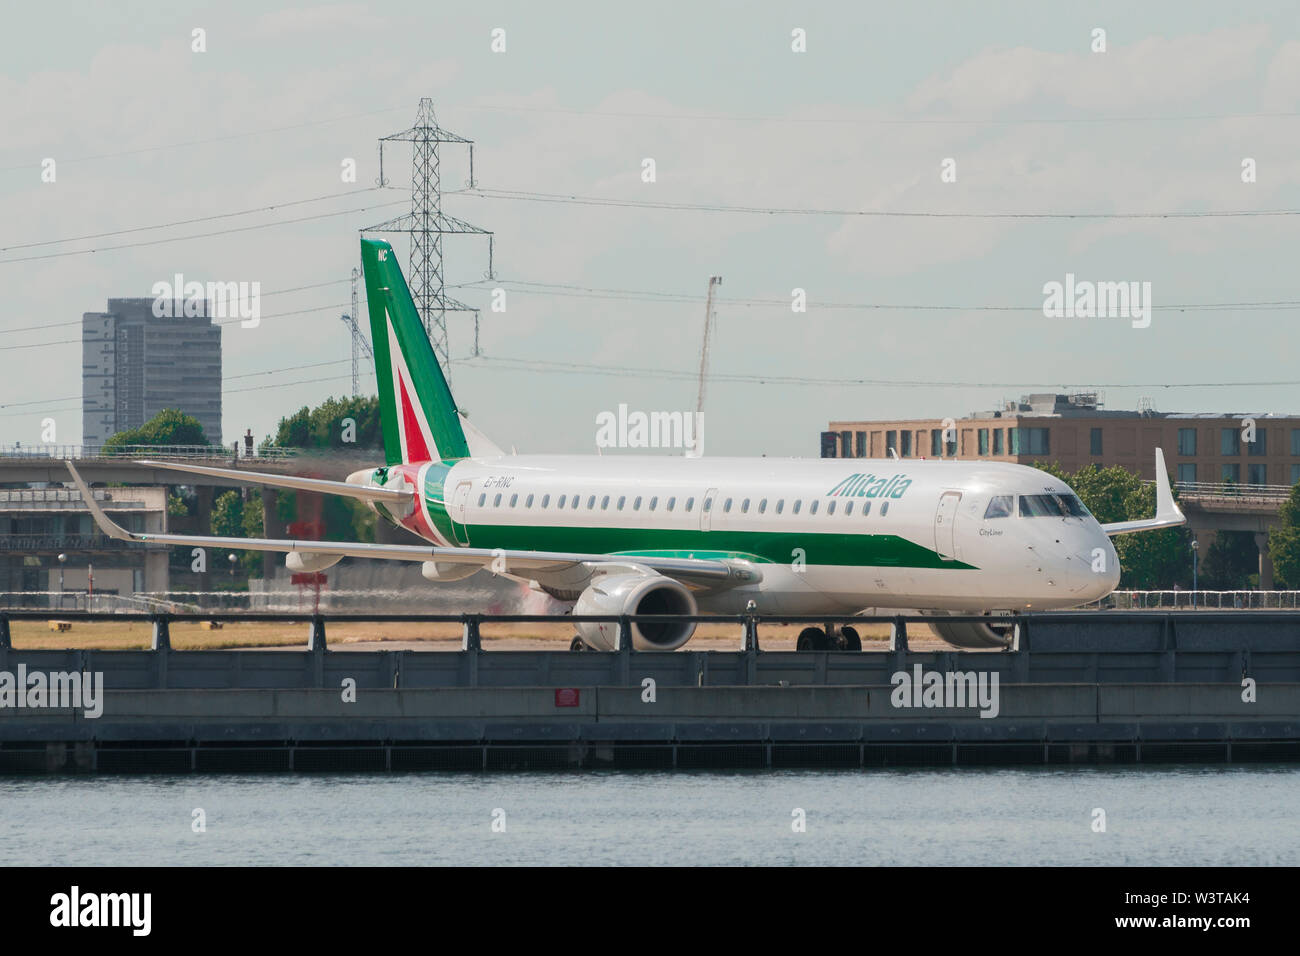 London, Uk - August 2, 2013 - Alitalia regional airplane taxiing at London City Airport after landing Stock Photo